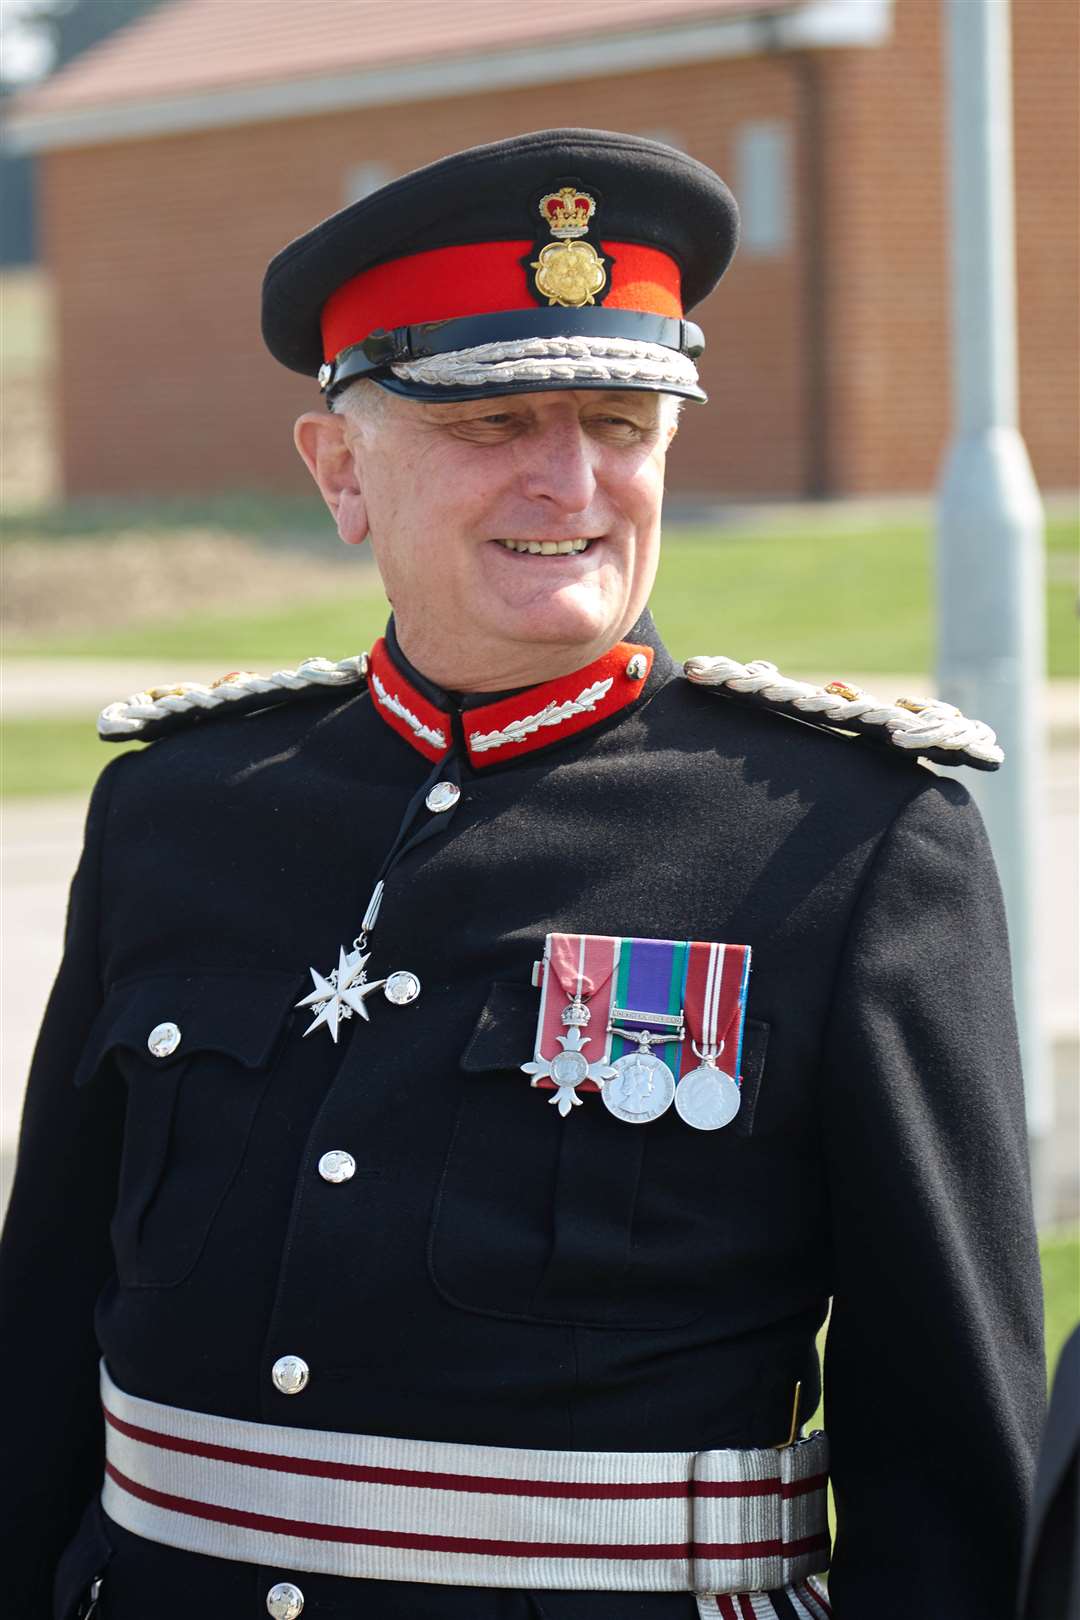 Viscount De L’Isle was the Lord-Lieutenant of Kent from September 1, 2011 to April 21, 2020. Picture: Steve Hickey